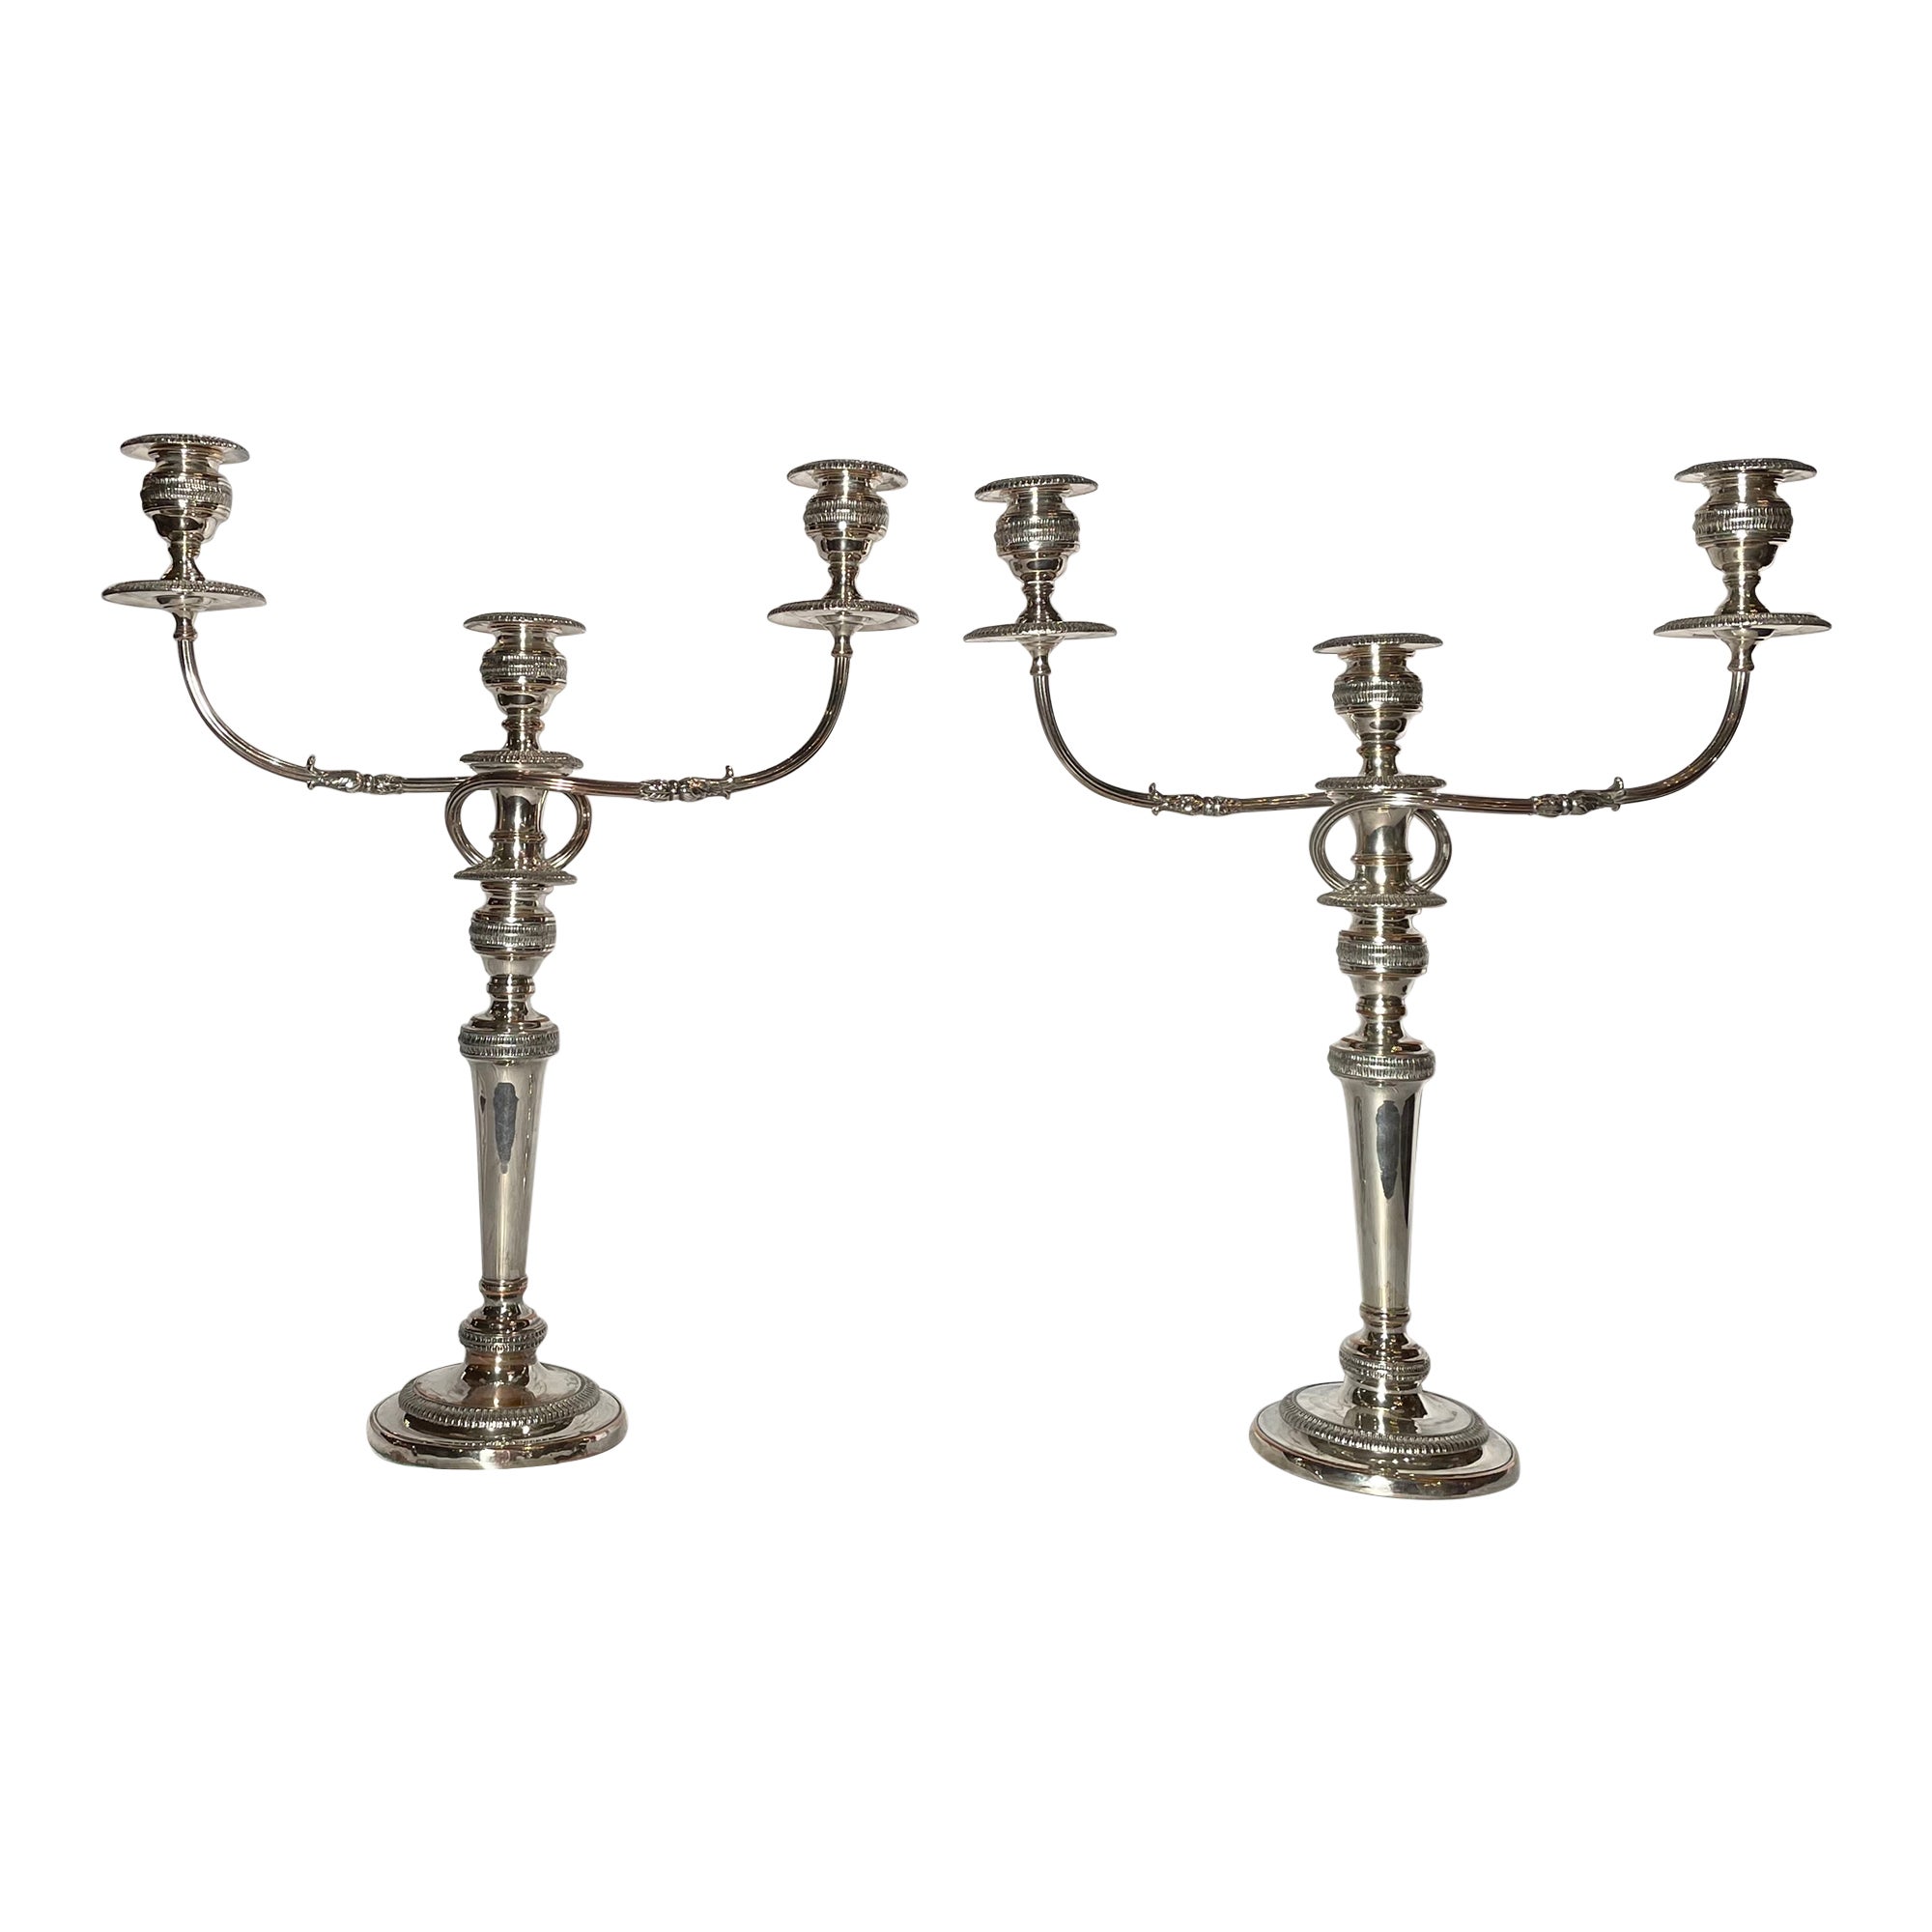 Pair of Antique English Sheffield Candelabras